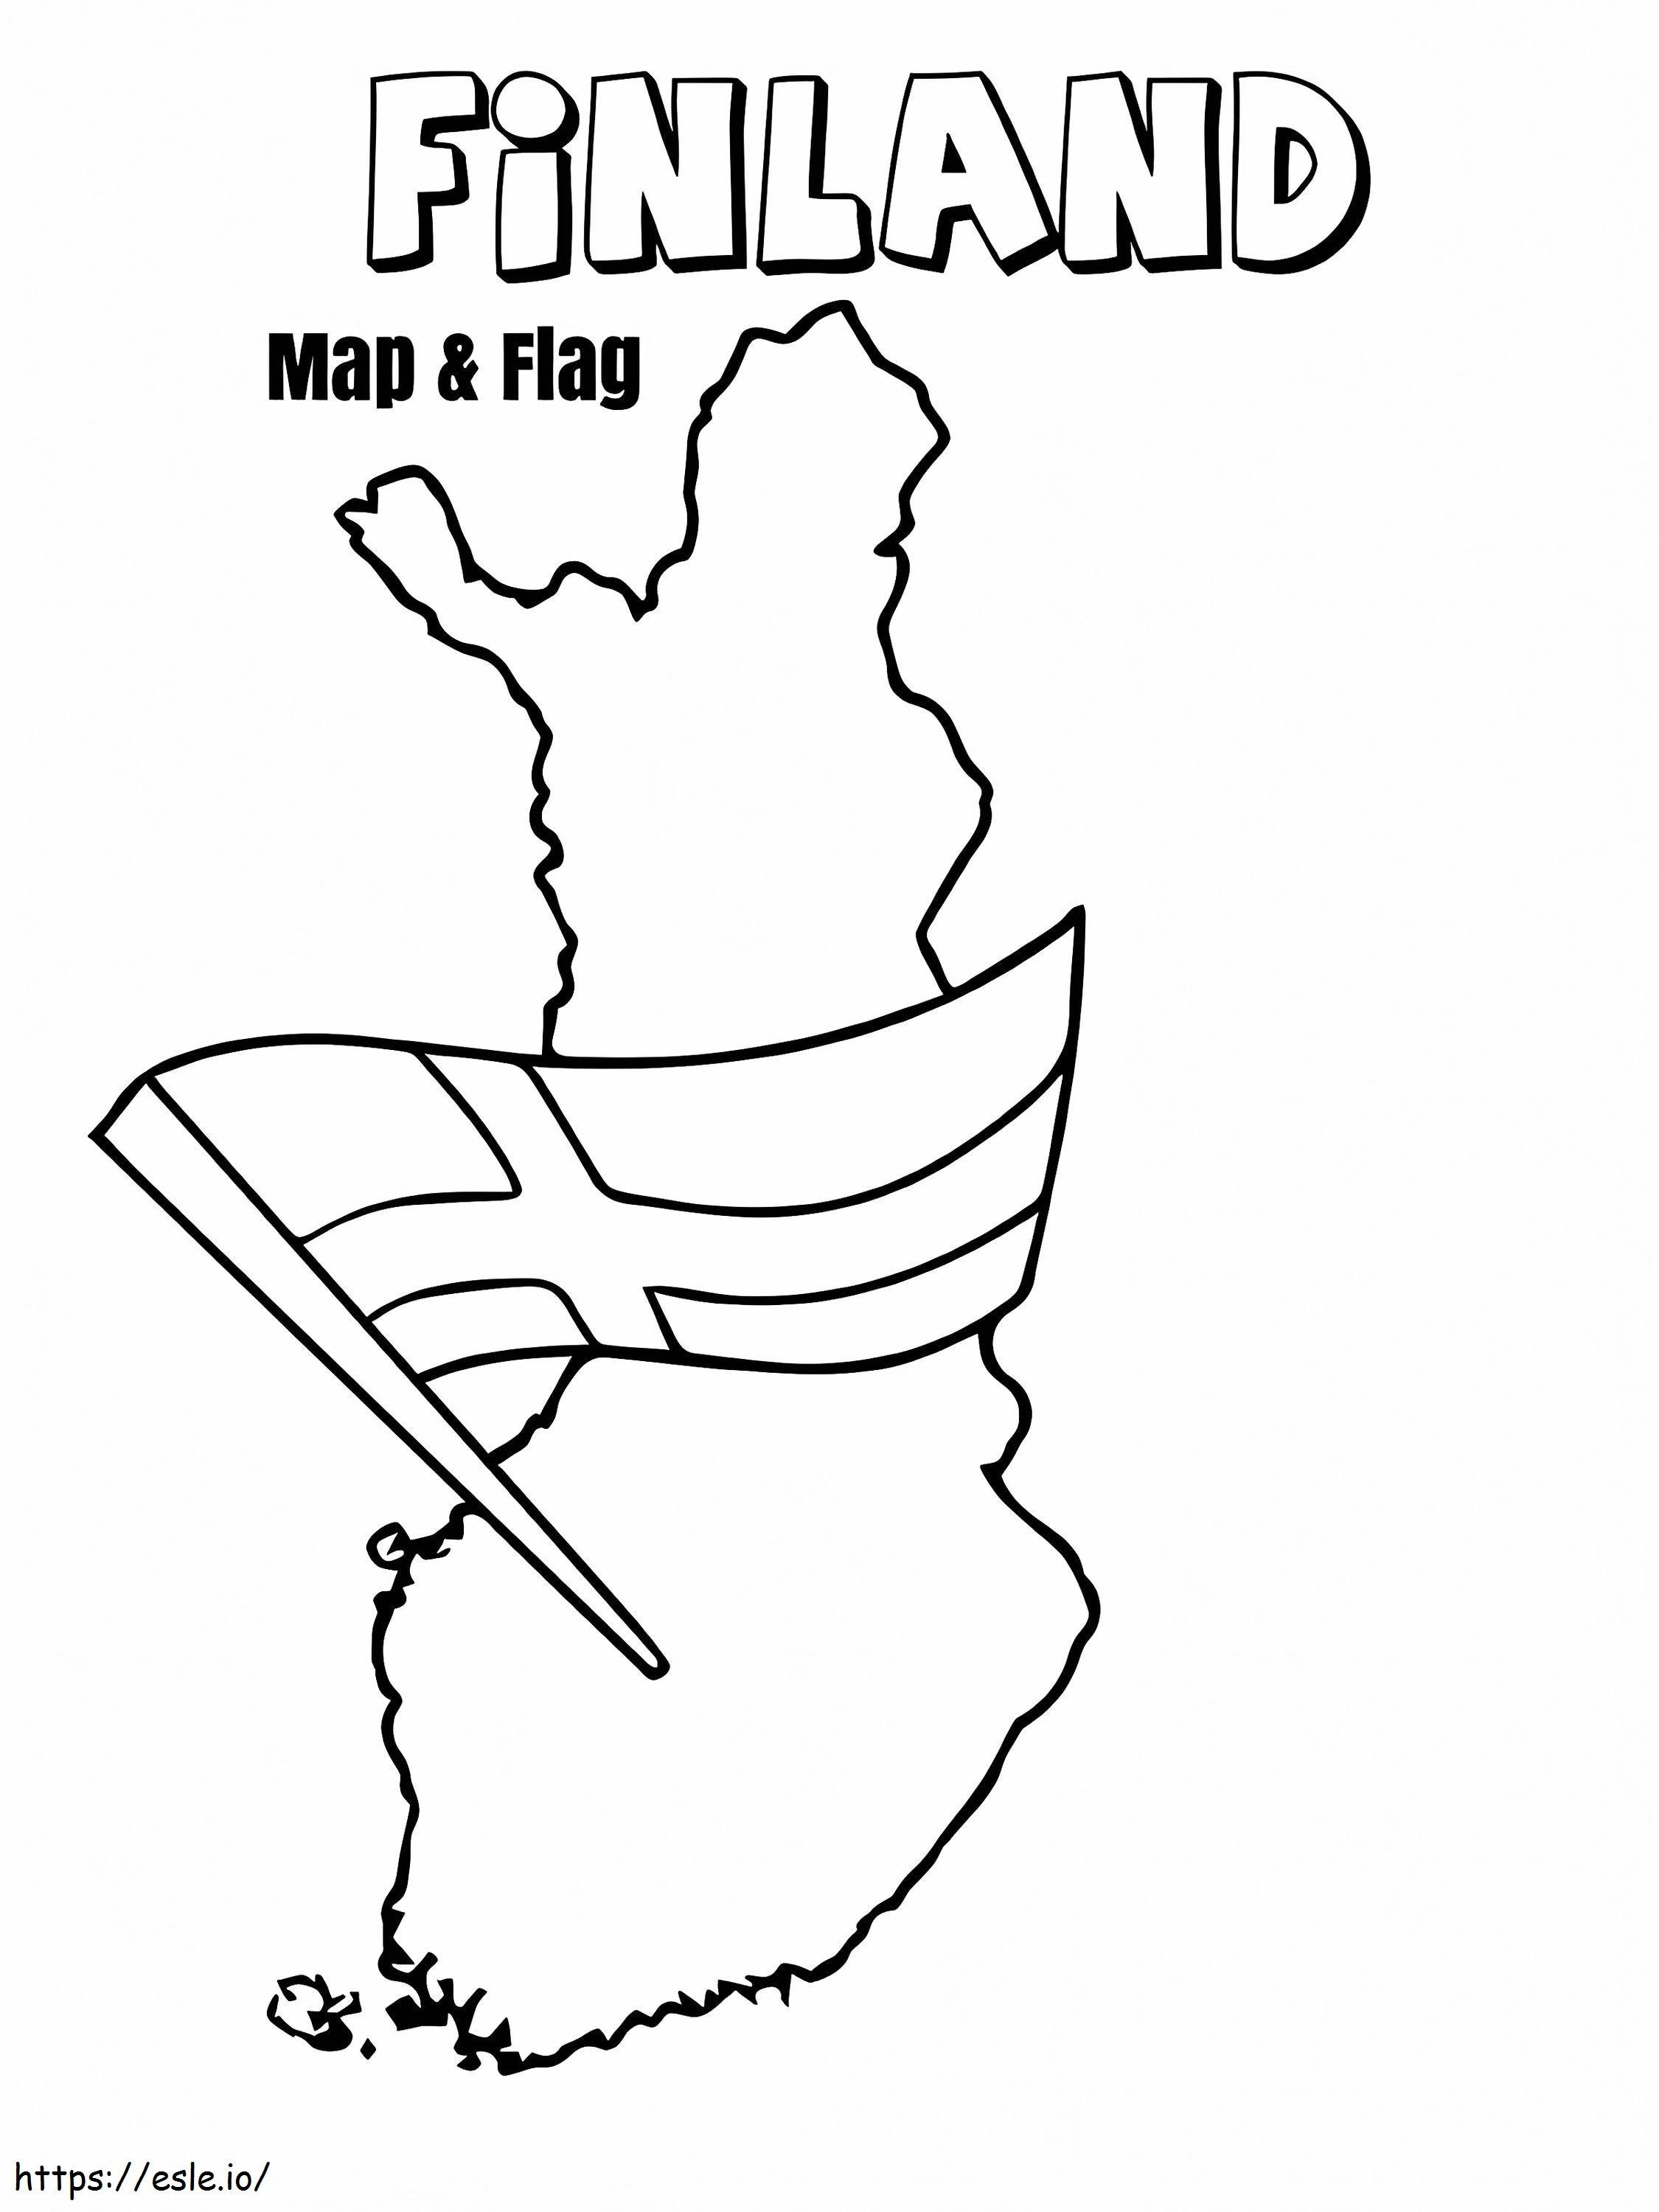 Finland Map And Flag coloring page